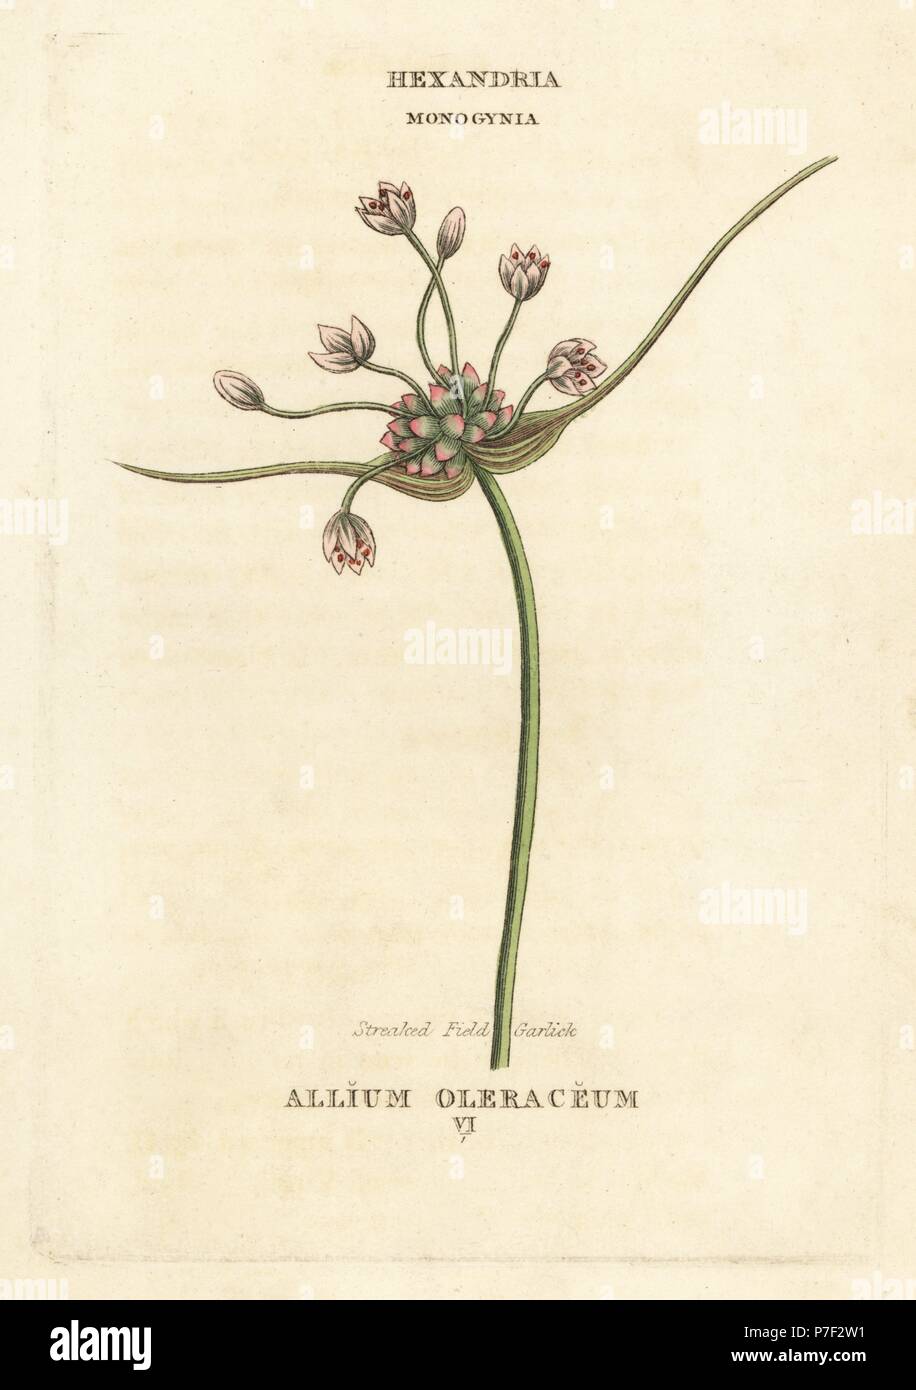 Streaked field garlic, Allium oleraceum. Handcoloured copperplate engraving after an illustration by Richard Duppa from his The Classes and Orders of the Linnaean System of Botany, Longman, Hurst, London, 1816. Stock Photo